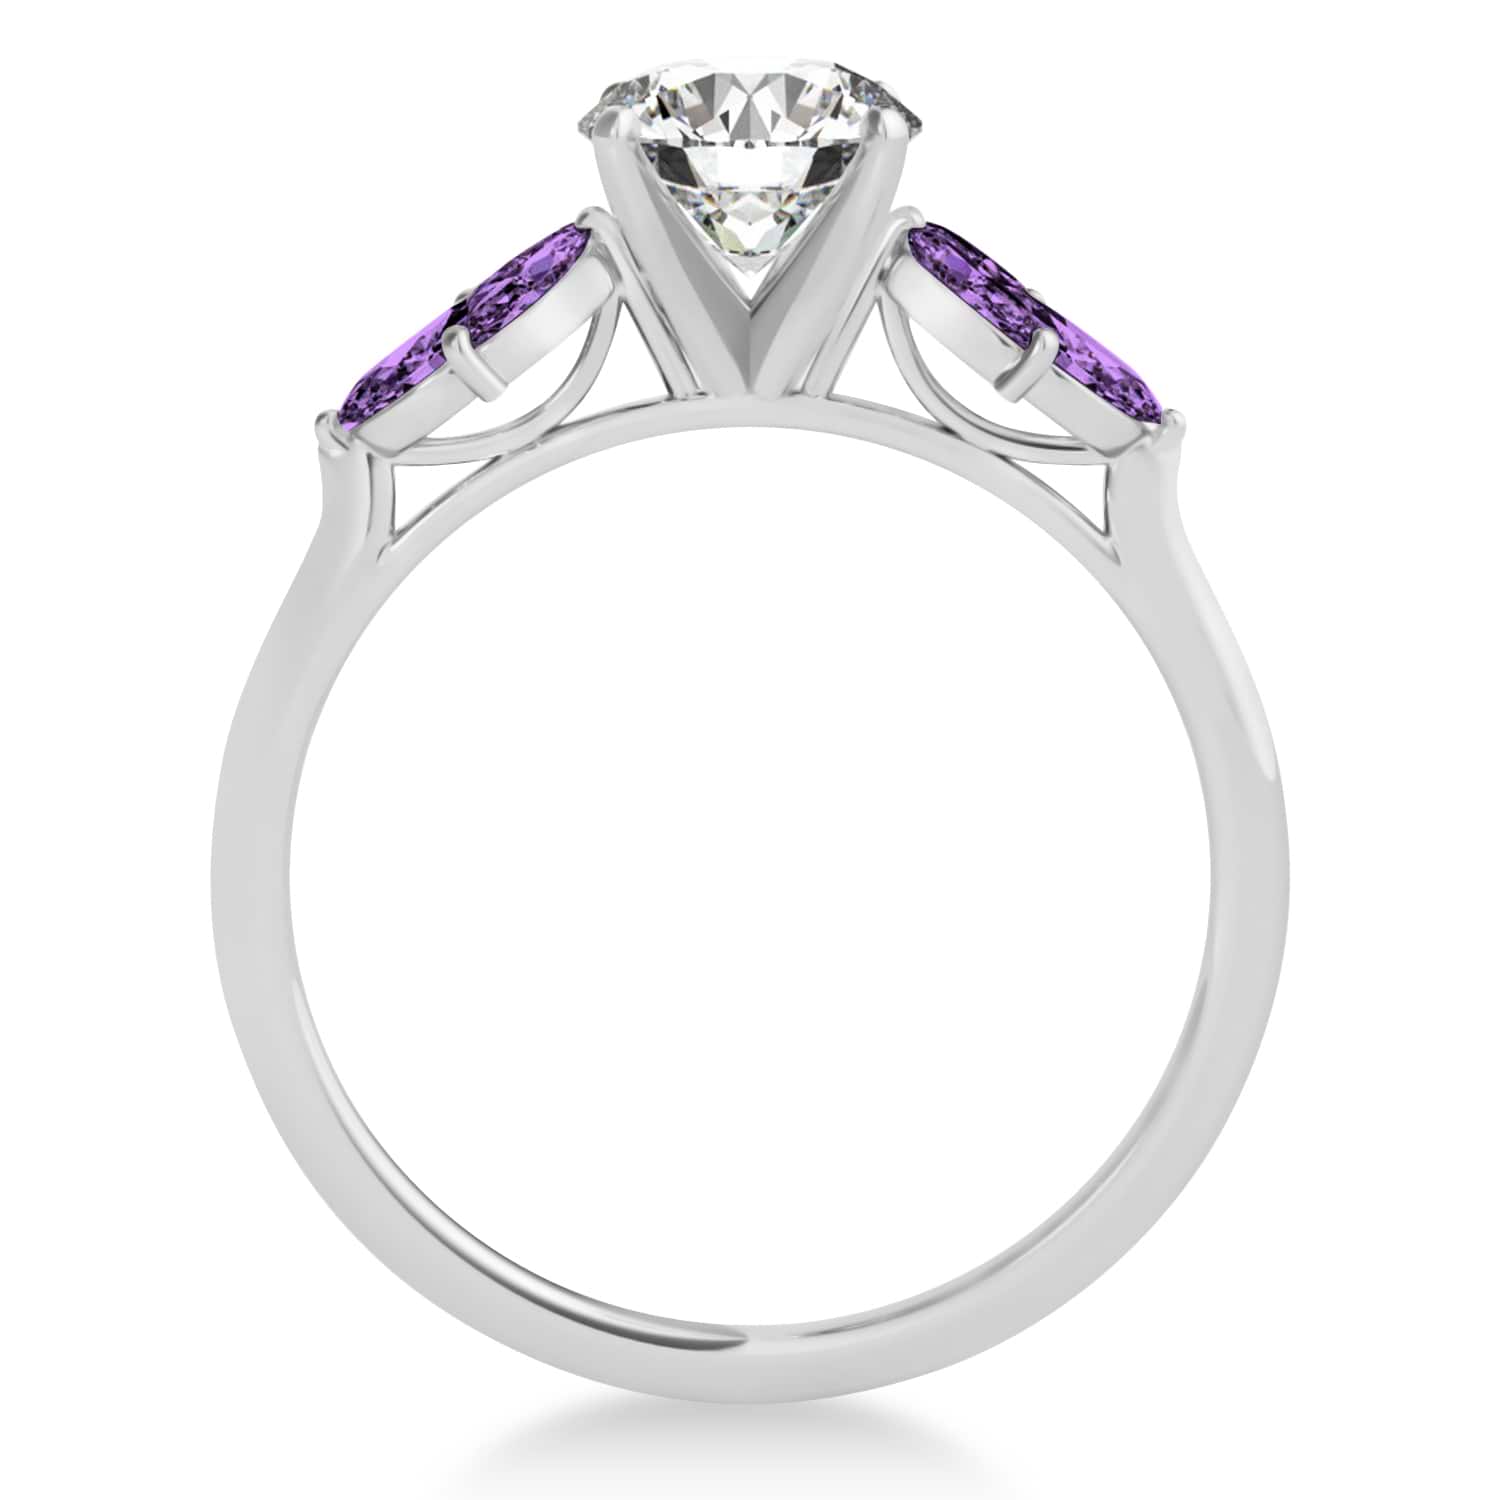 Amethyst Marquise Floral Engagement Ring 14k White Gold (0.50ct)